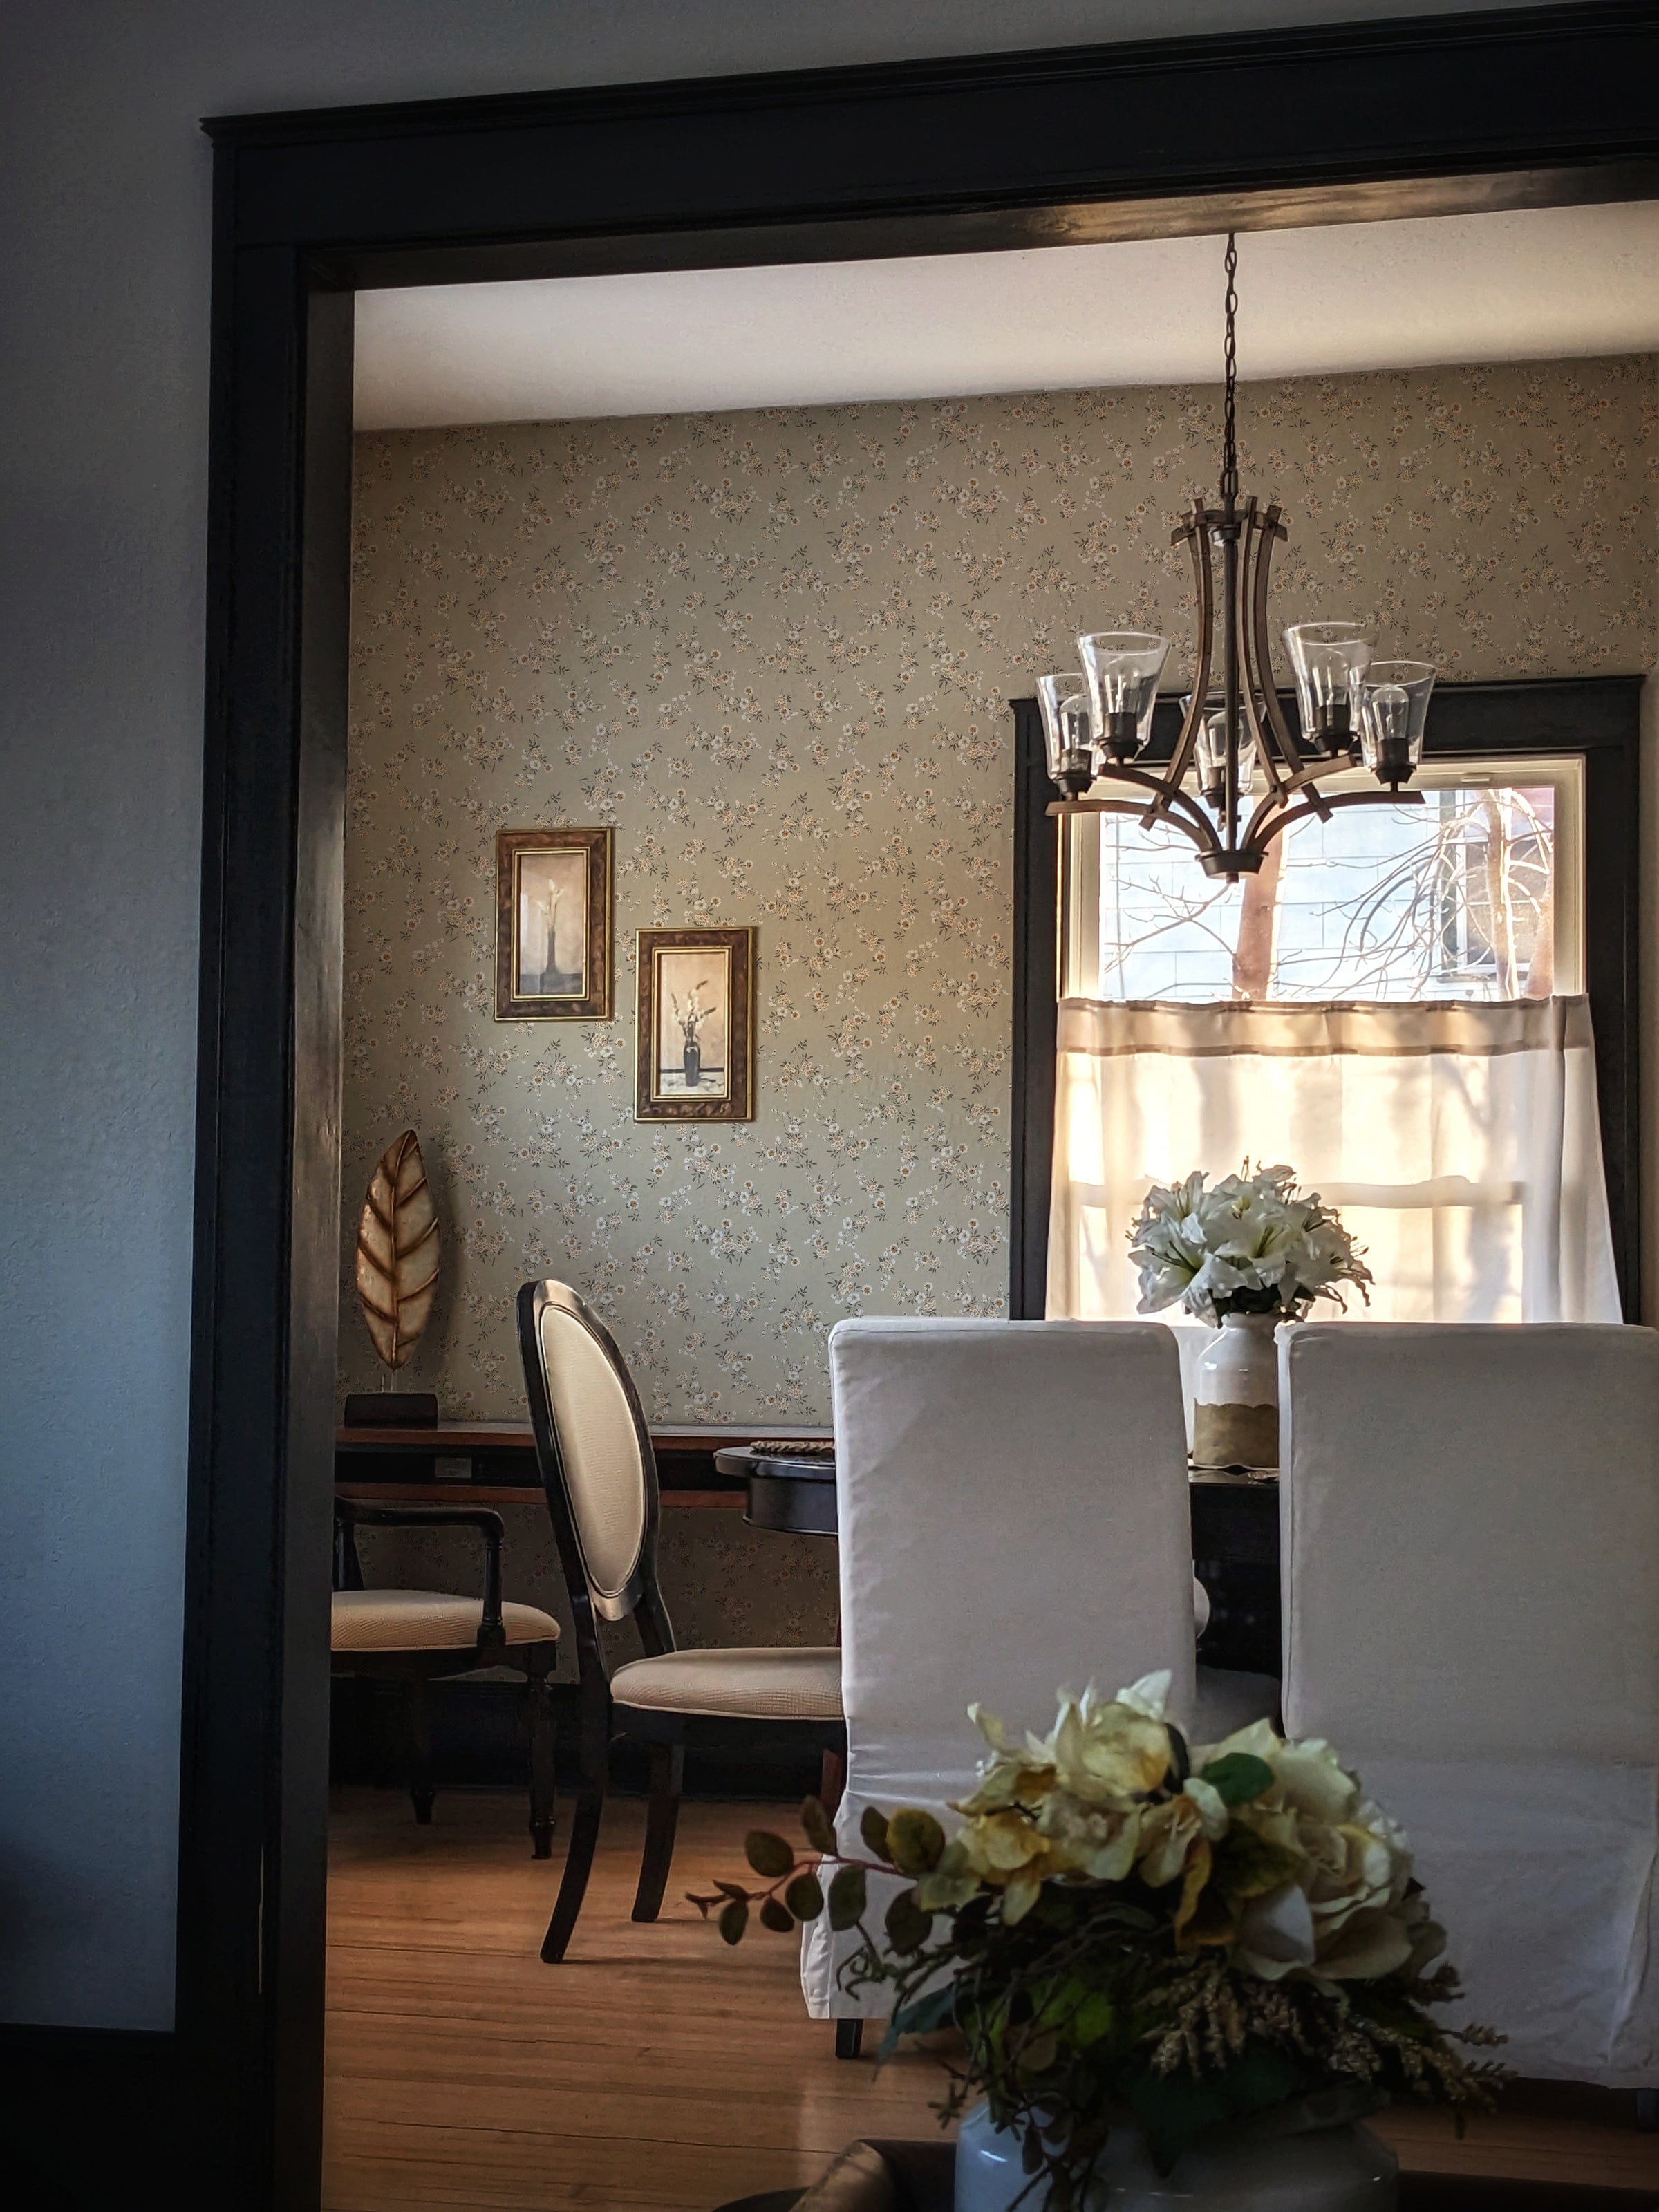 A view into a dining room through a dark frame, showcasing the Classic Floral Wallpaper adorned with an elegant floral design. The room is bathed in warm sunlight, highlighting the antique chandelier and creating a cozy atmosphere. White slipcovered chairs and a table arrangement with flowers complete the inviting scene.